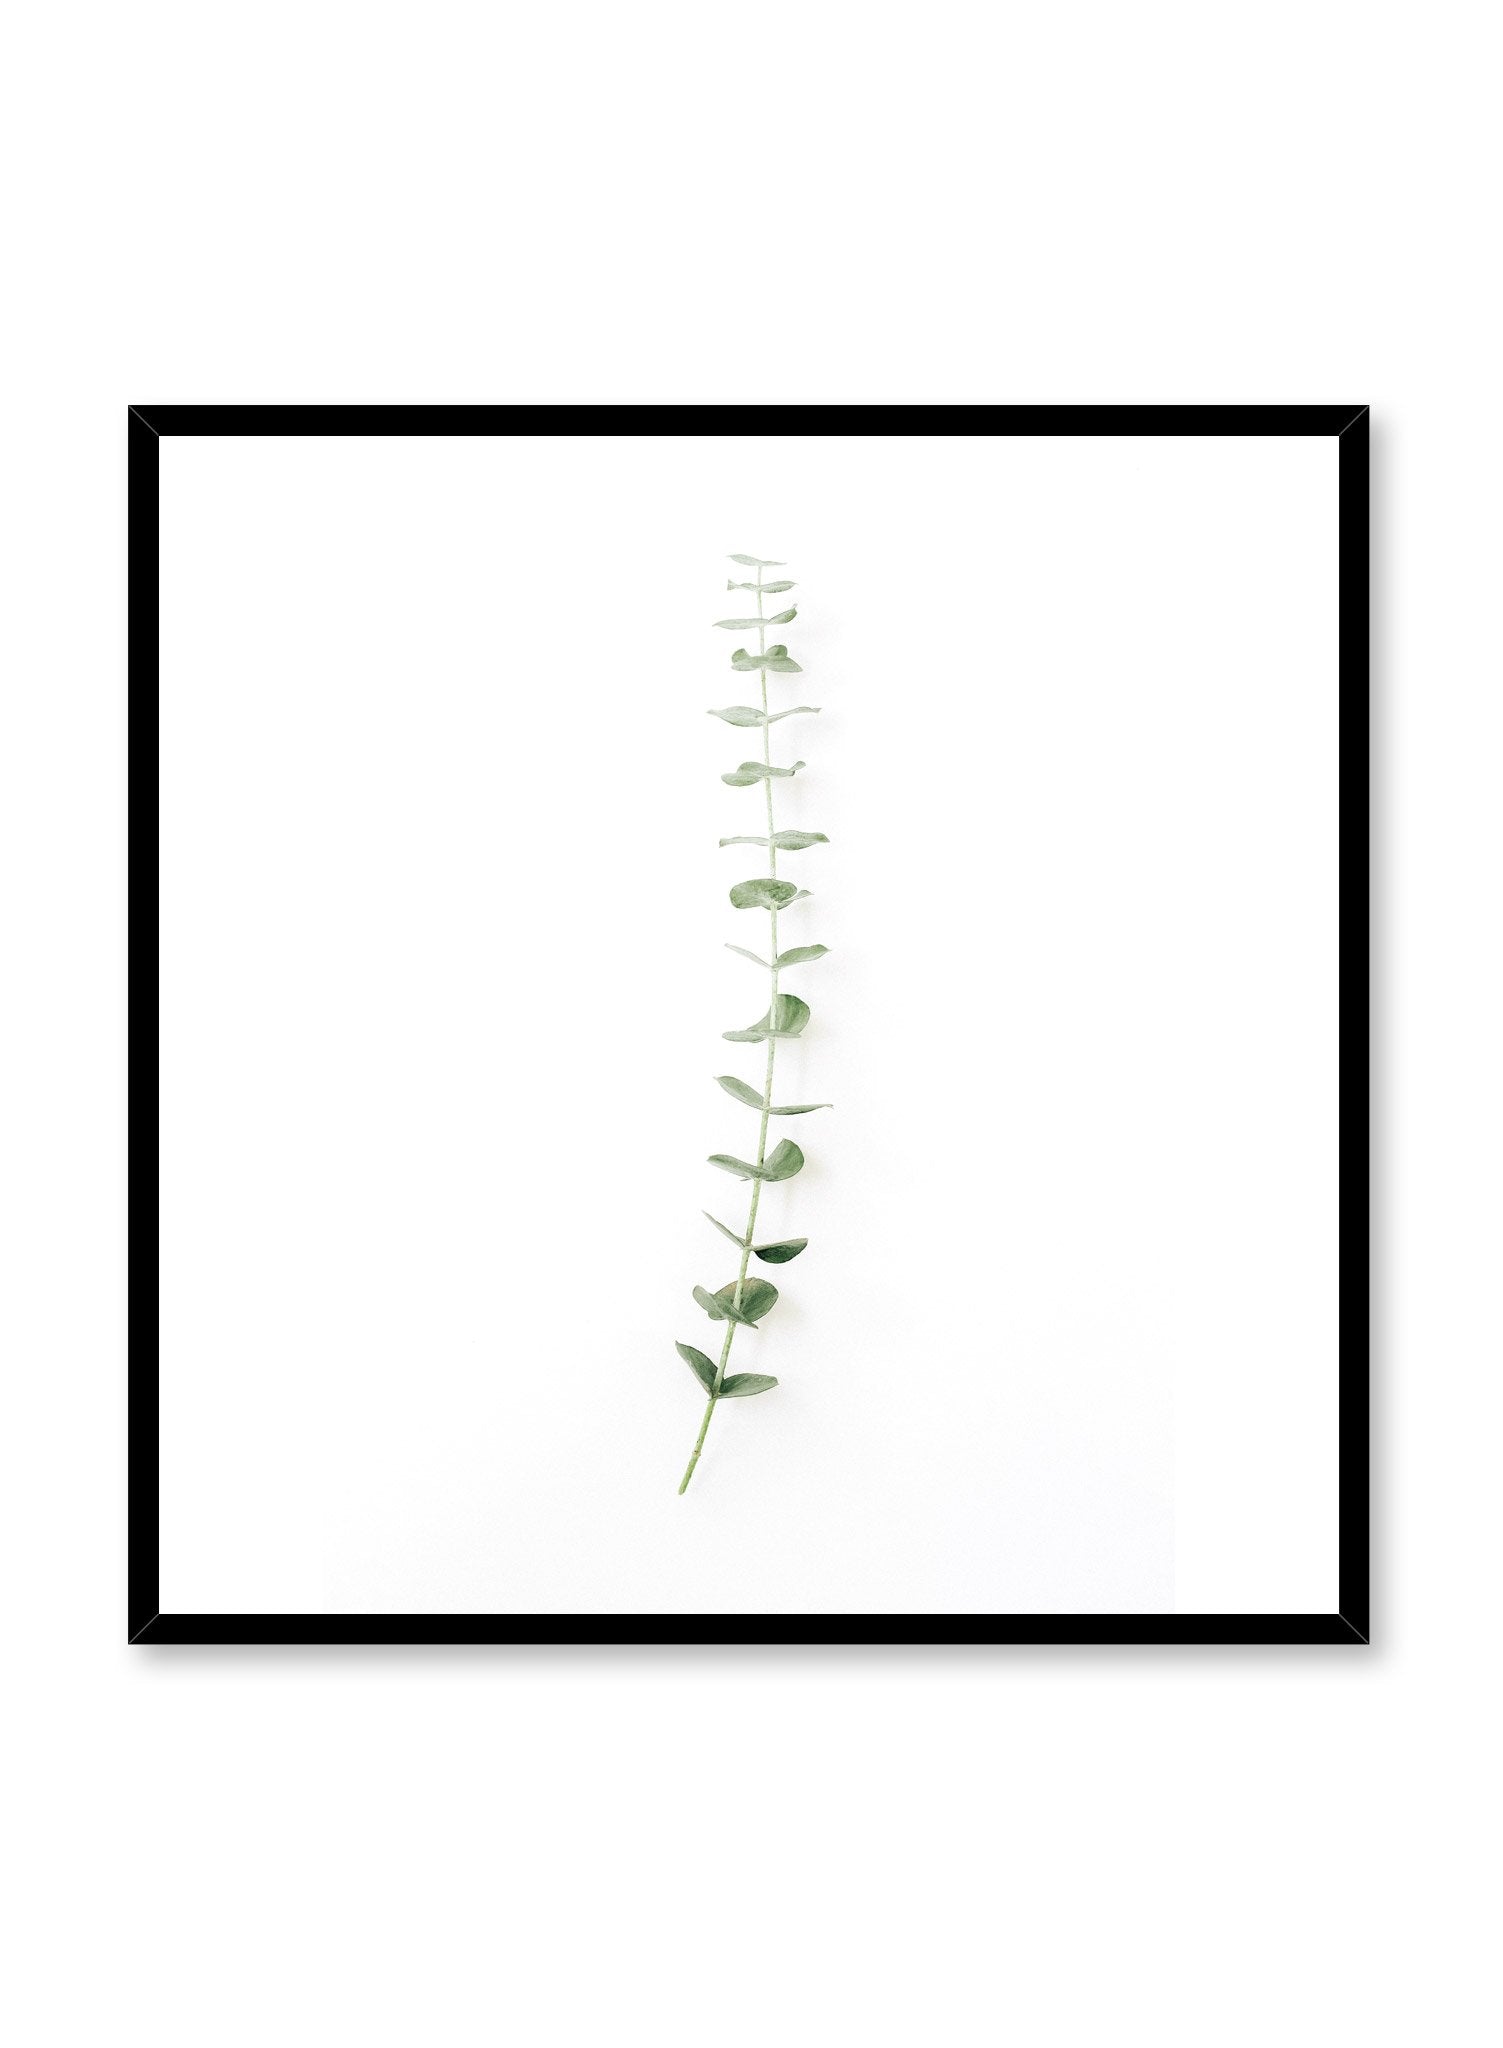 Minimalistic wall poster by Opposite Wall with eucalyptus stem photography